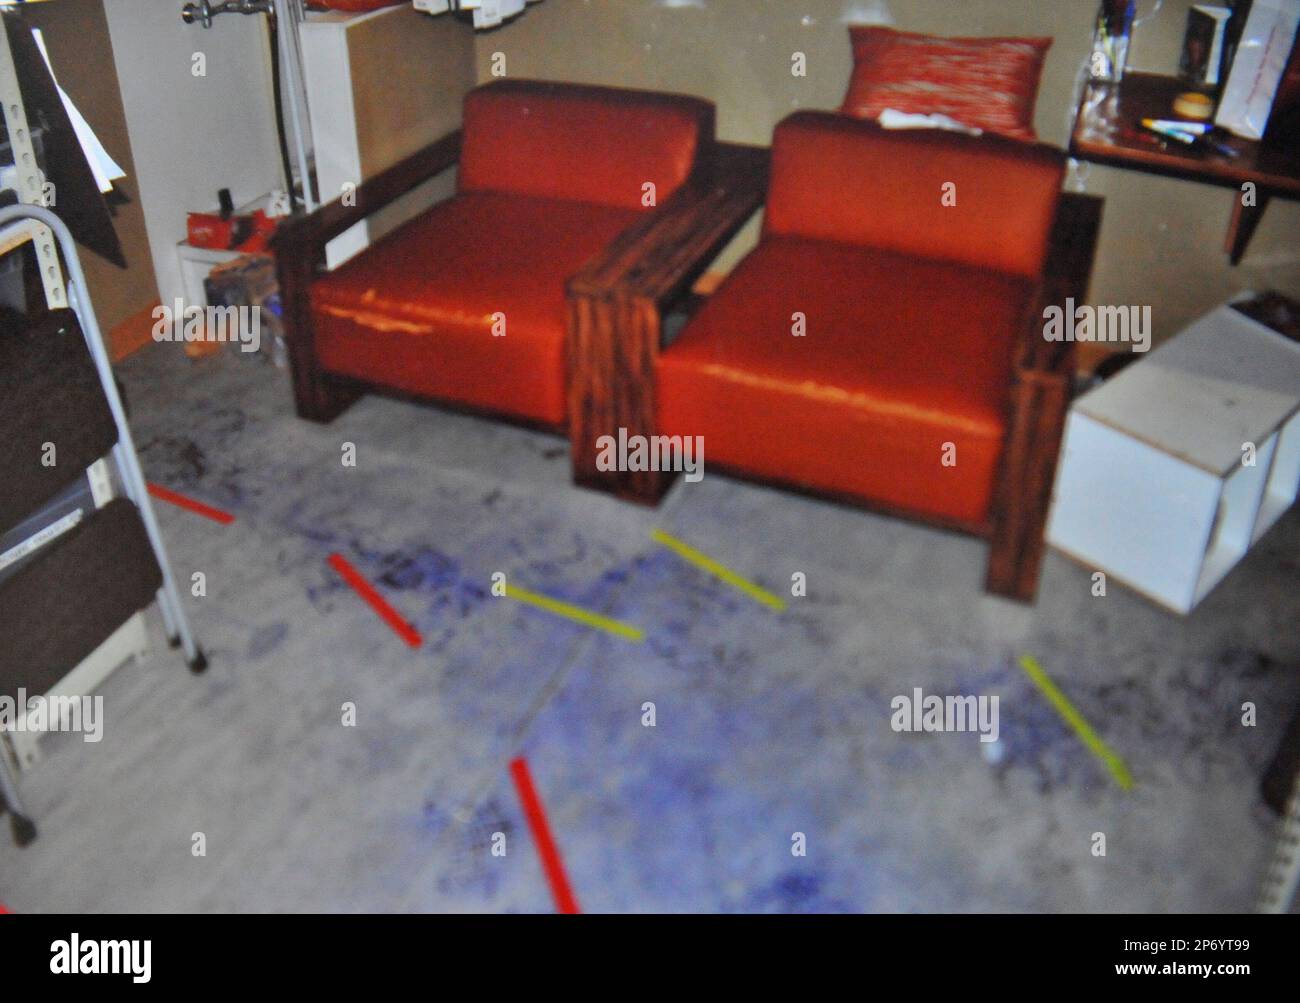 https://c8.alamy.com/comp/2P6YT99/shown-is-a-crime-scene-photo-presented-during-the-murder-trial-of-brittany-norwood-in-rockville-md-on-wednesday-oct-26-2011-norwood-is-on-trial-for-the-killing-of-co-worker-jayna-murray-inside-the-lululemon-athletica-store-in-bethesda-md-in-march-ap-photomark-gail-pool-2P6YT99.jpg